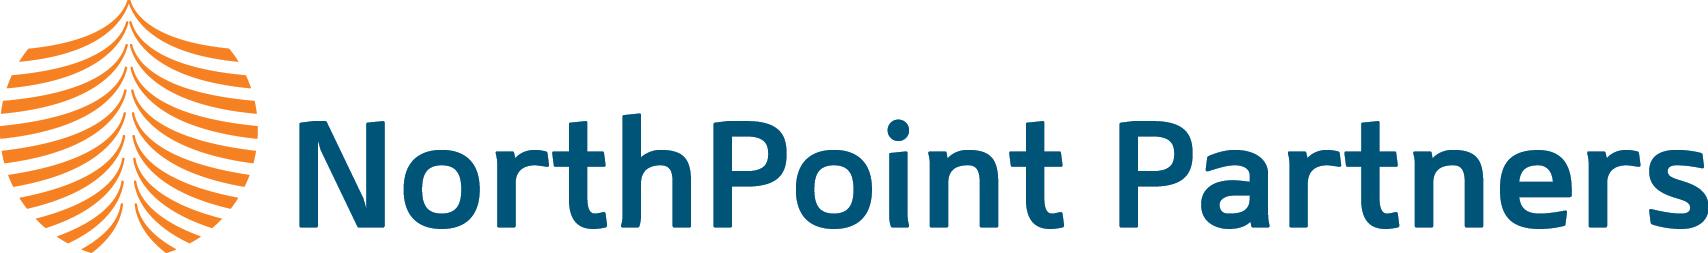 Northpoint Partners Ltd